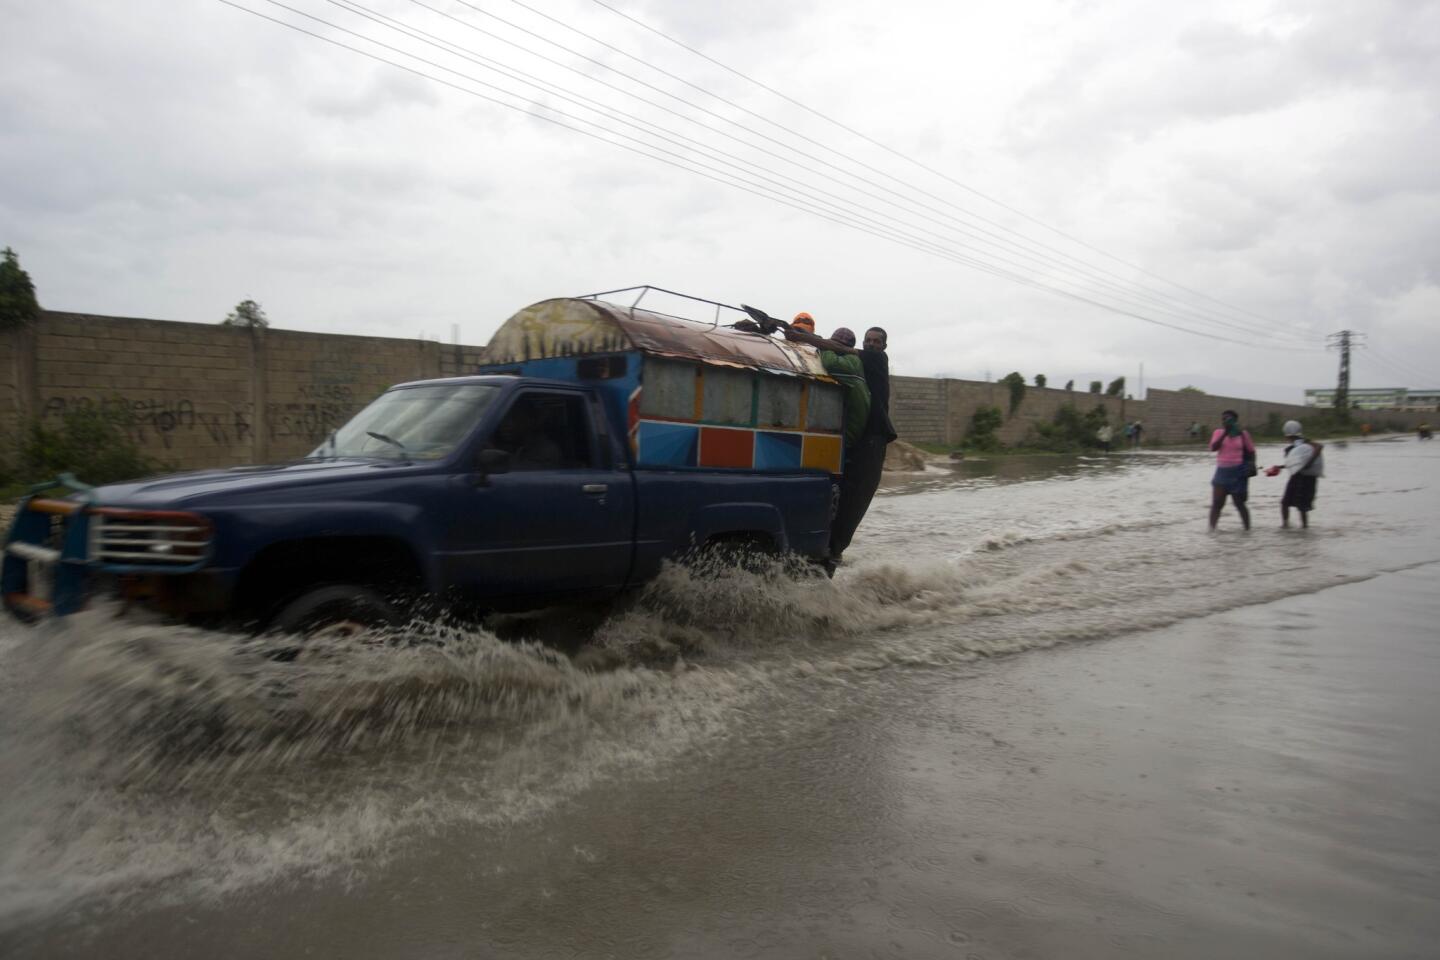 A "tap-tap" truck carrying commuters drives through a street flooded by rain brought by Hurricane Matthew in Port-au-Prince, Haiti, on Oct. 4, 2016.